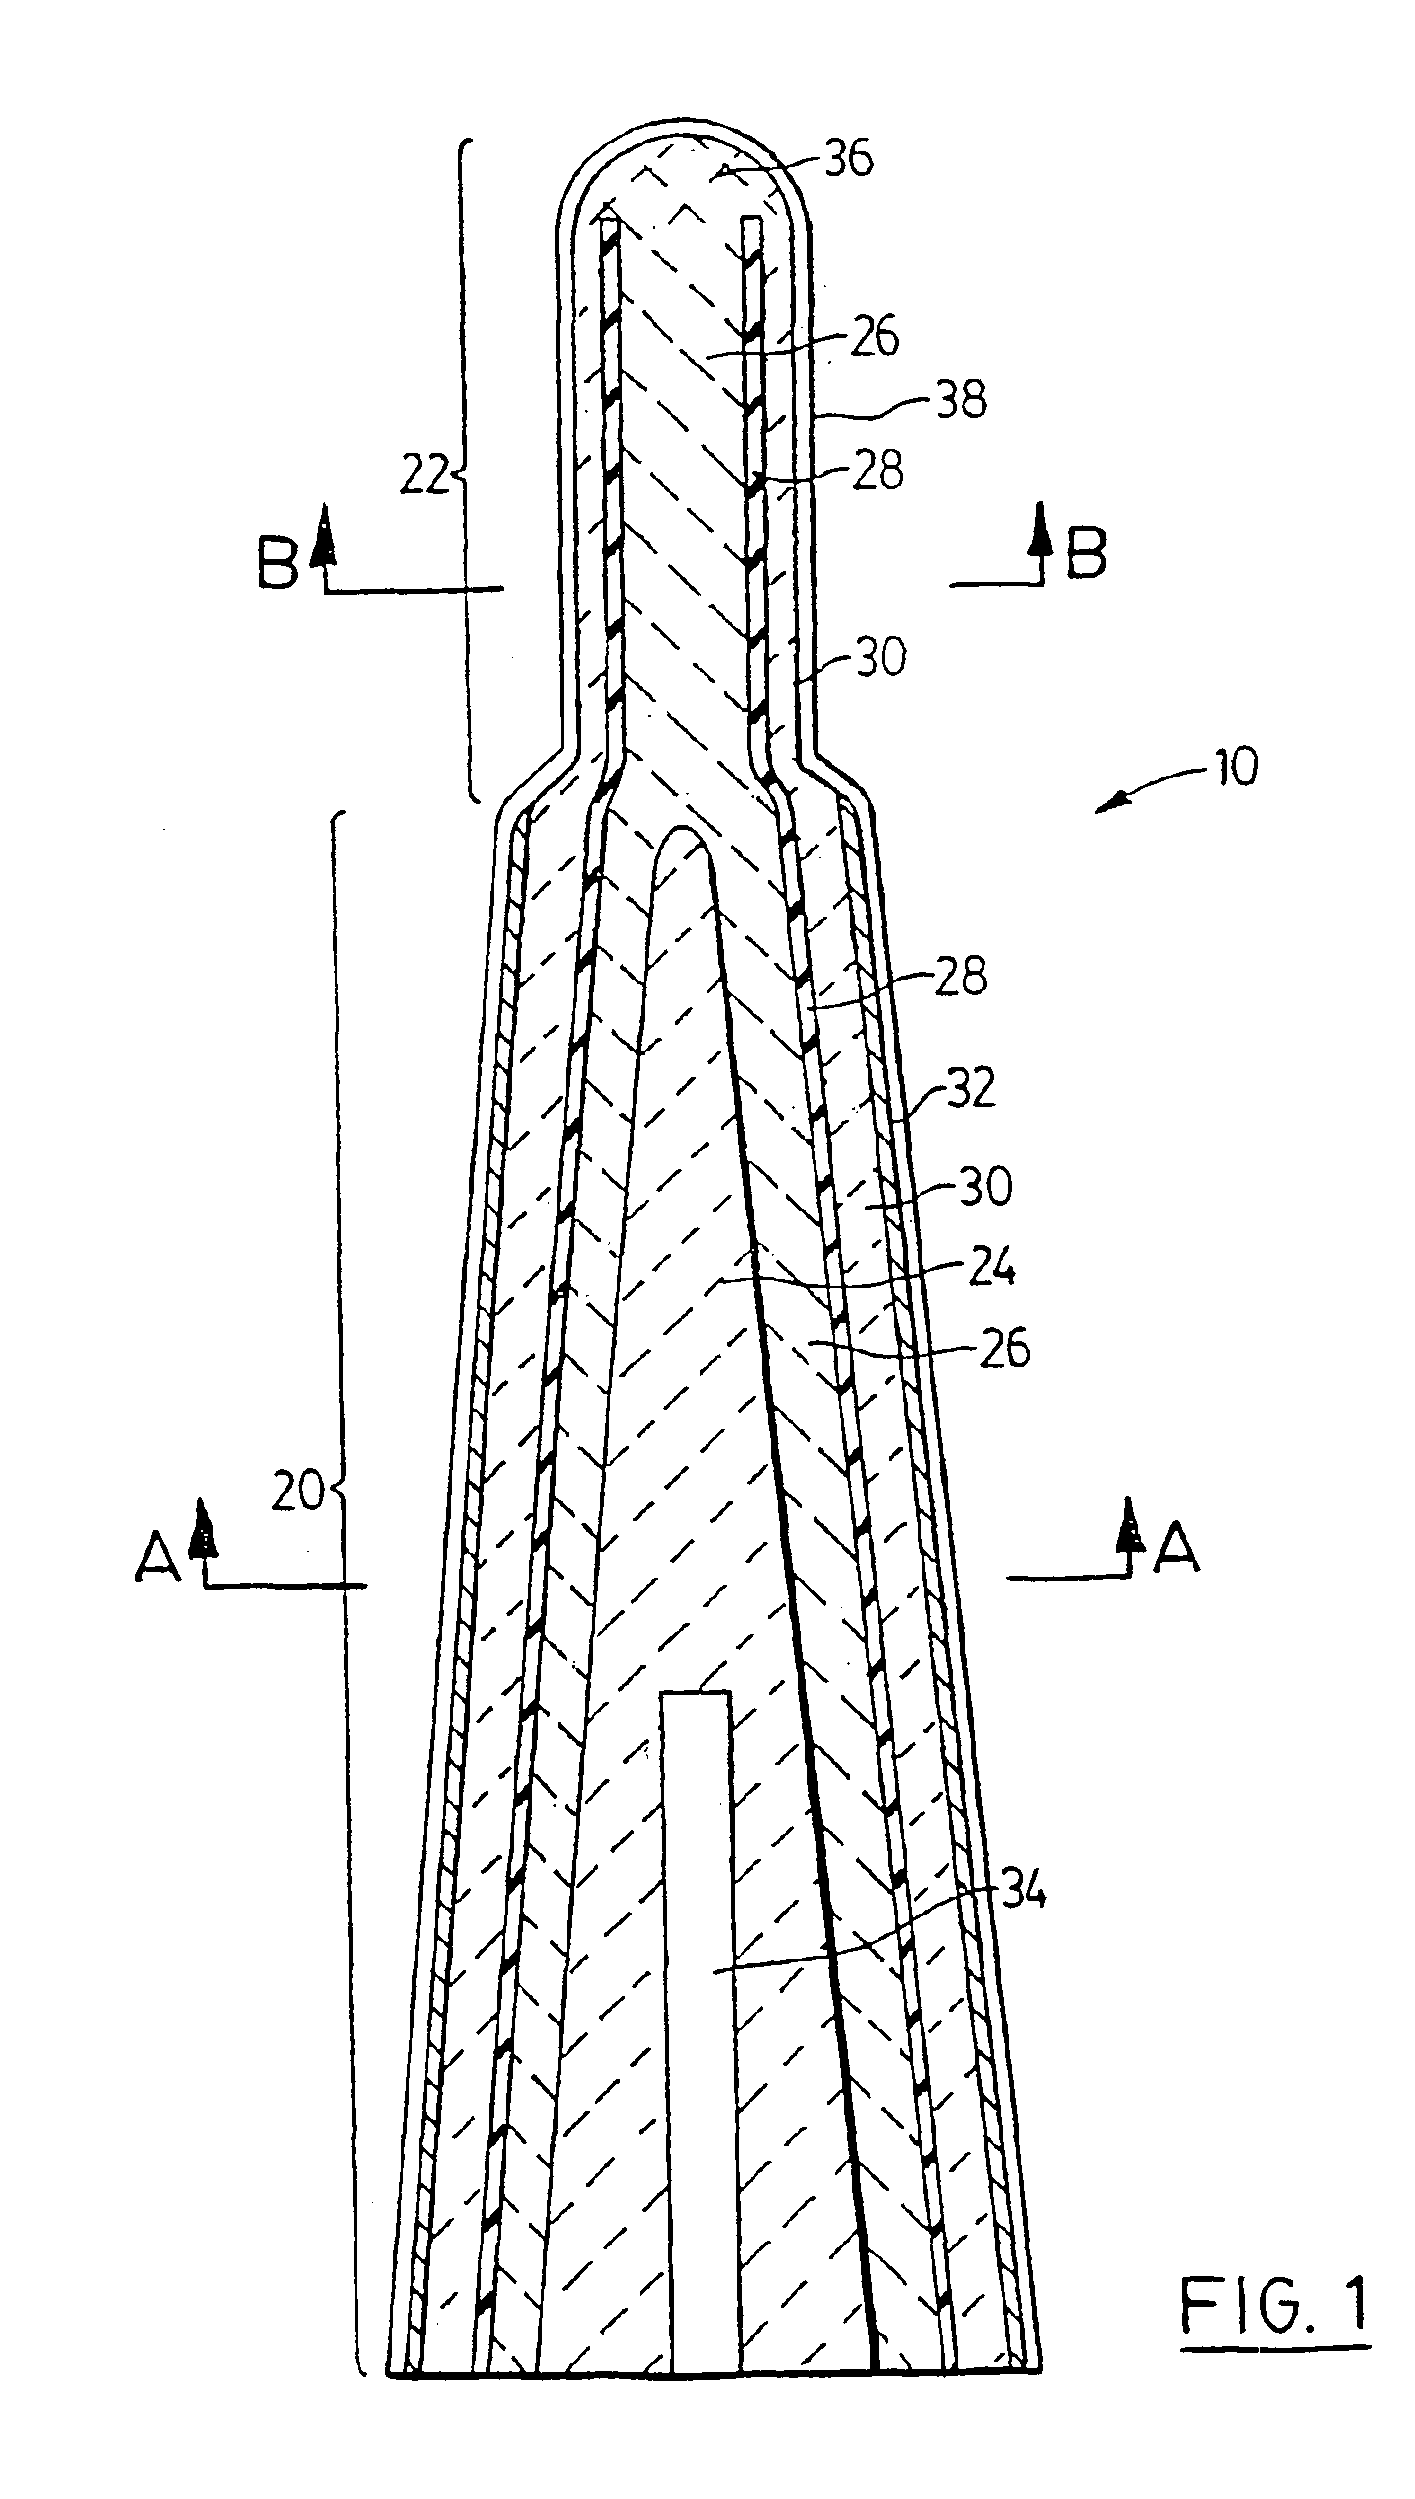 Multi-layer ceramic heater element and method of making same